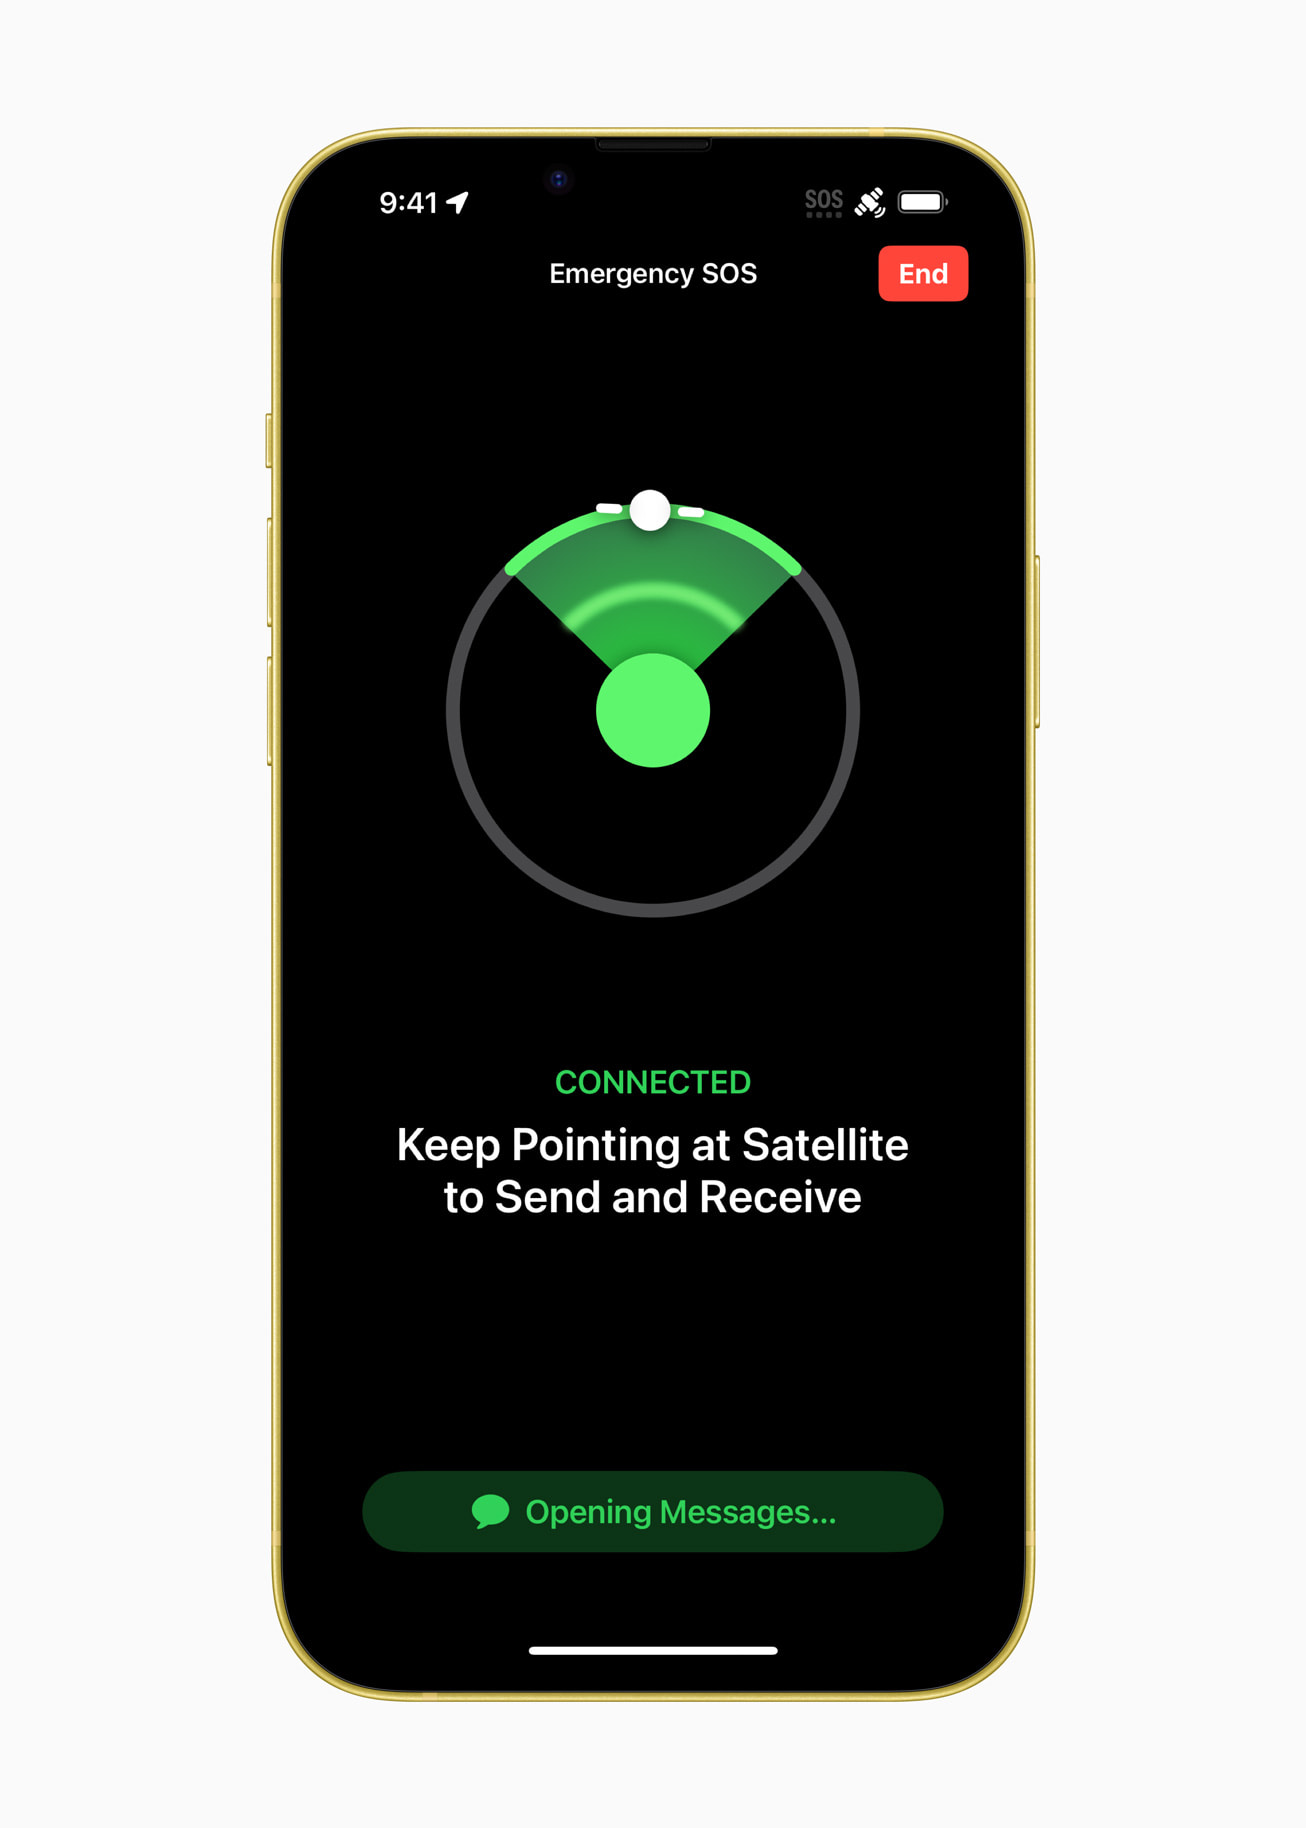 SOS of Satellite Emergency invites the user to keep his phone oriented towards a satellite